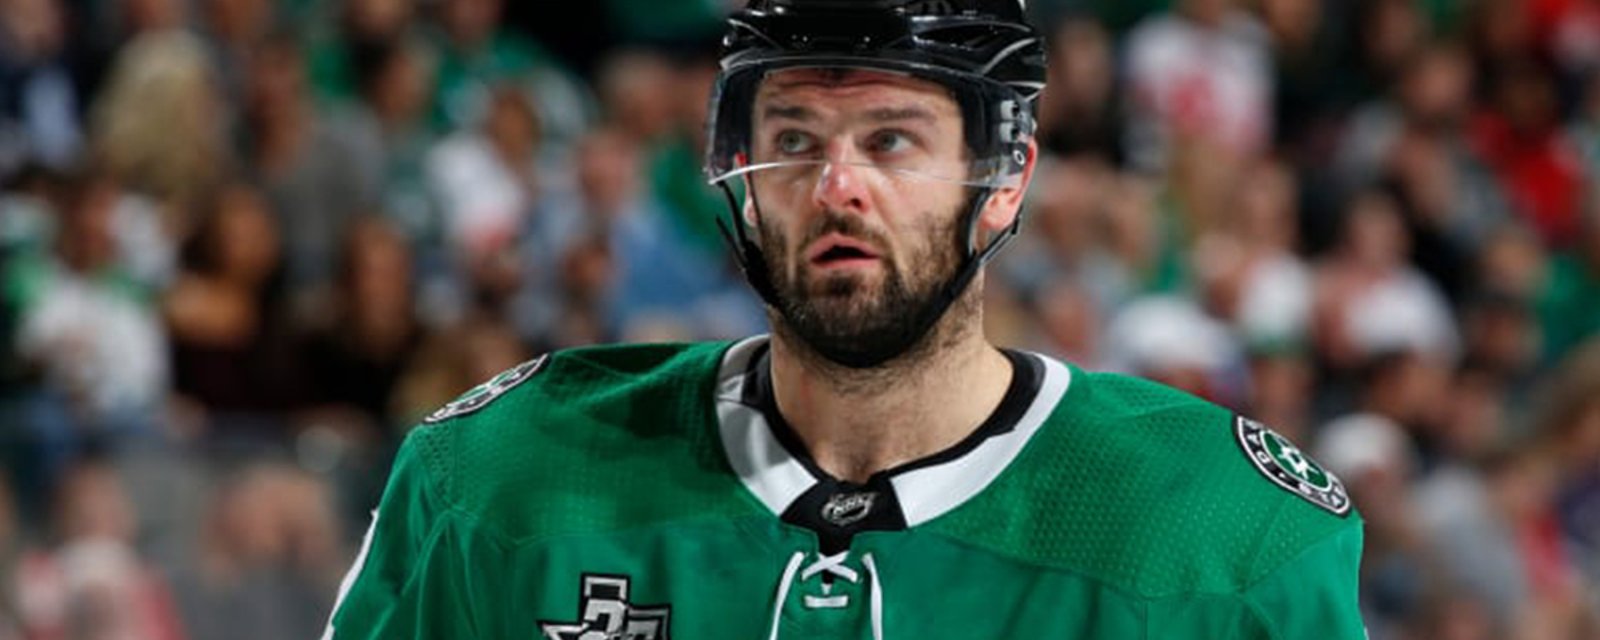 Radulov’s coronavirus test results finally revealed after many days without an update on his health 